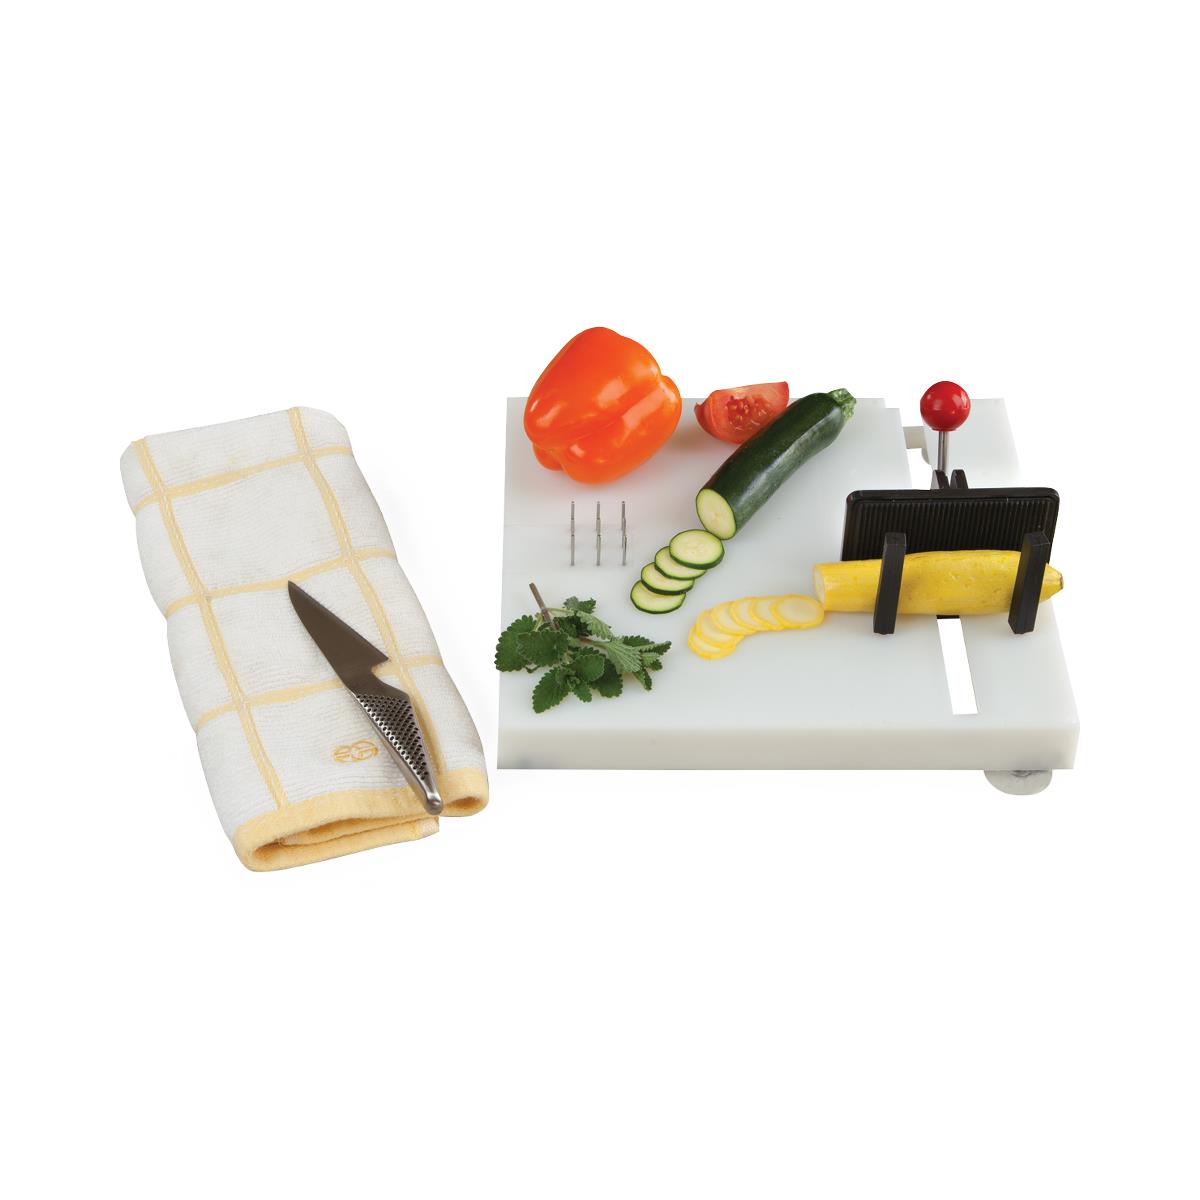 Anita Cutting Boards by Linden of Sweden - Large - Stabo Imports